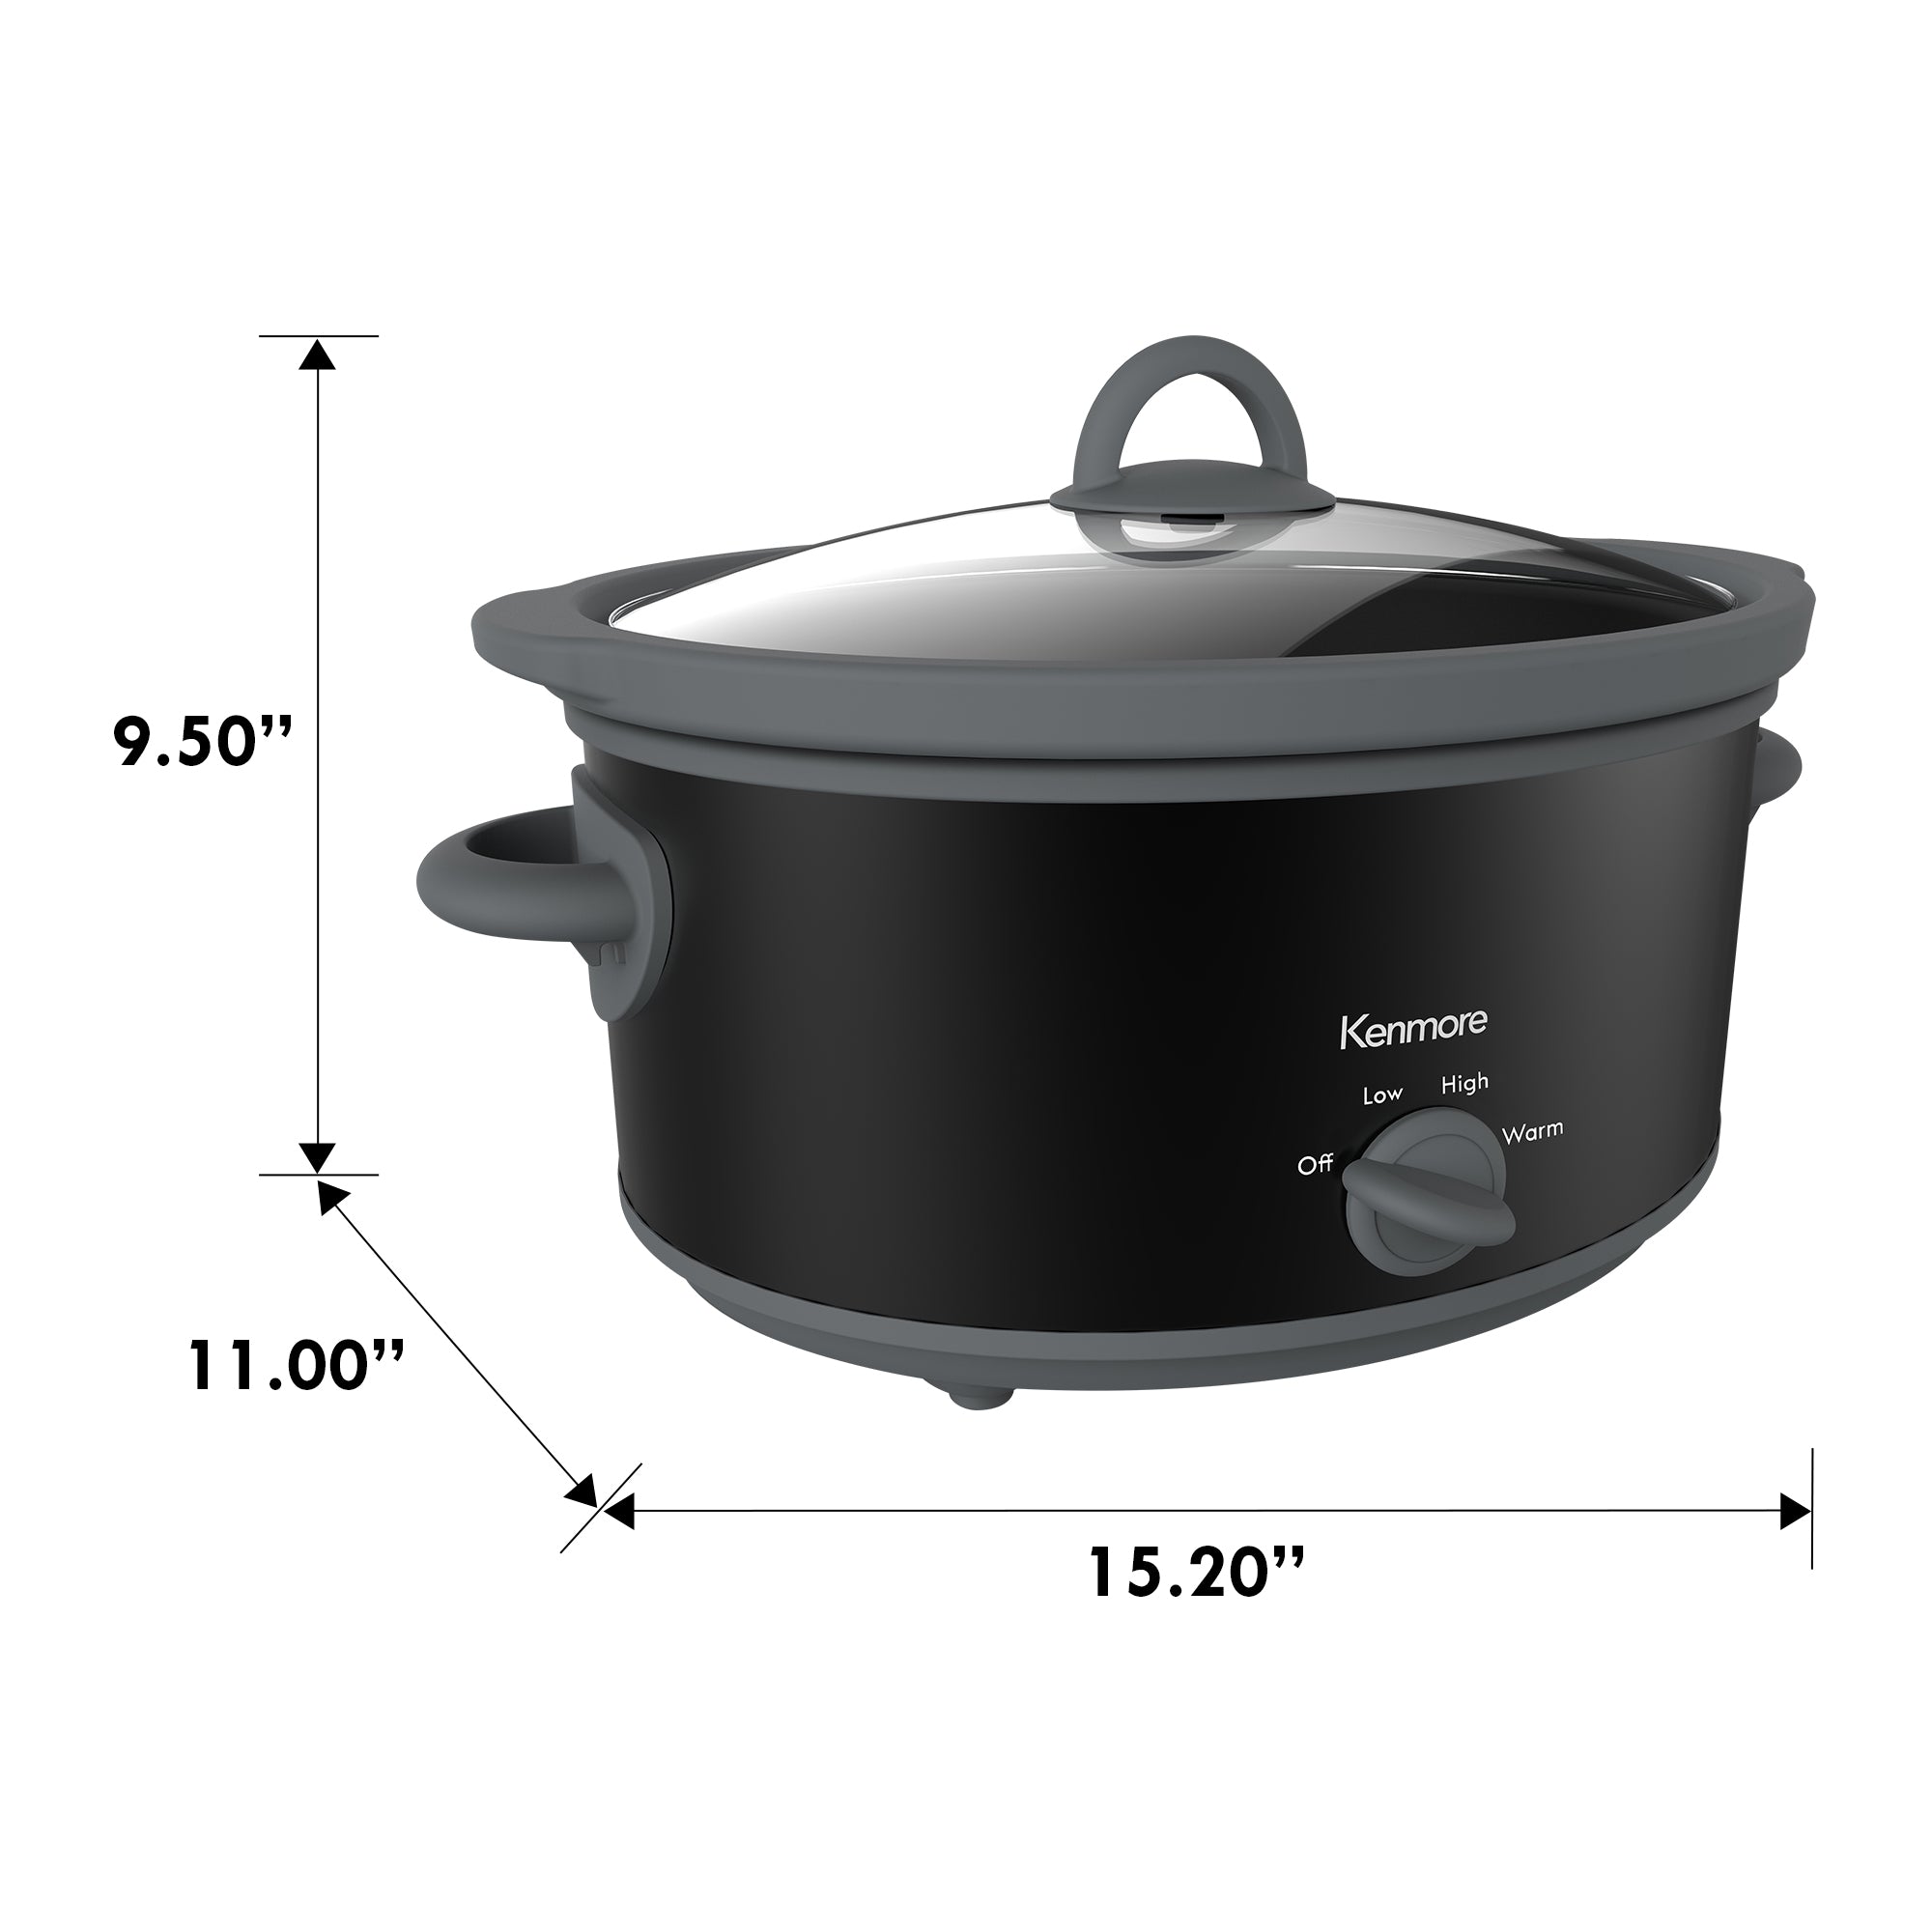 Kenmore 5 quart black slow cooker on a white background with dimensions labeled